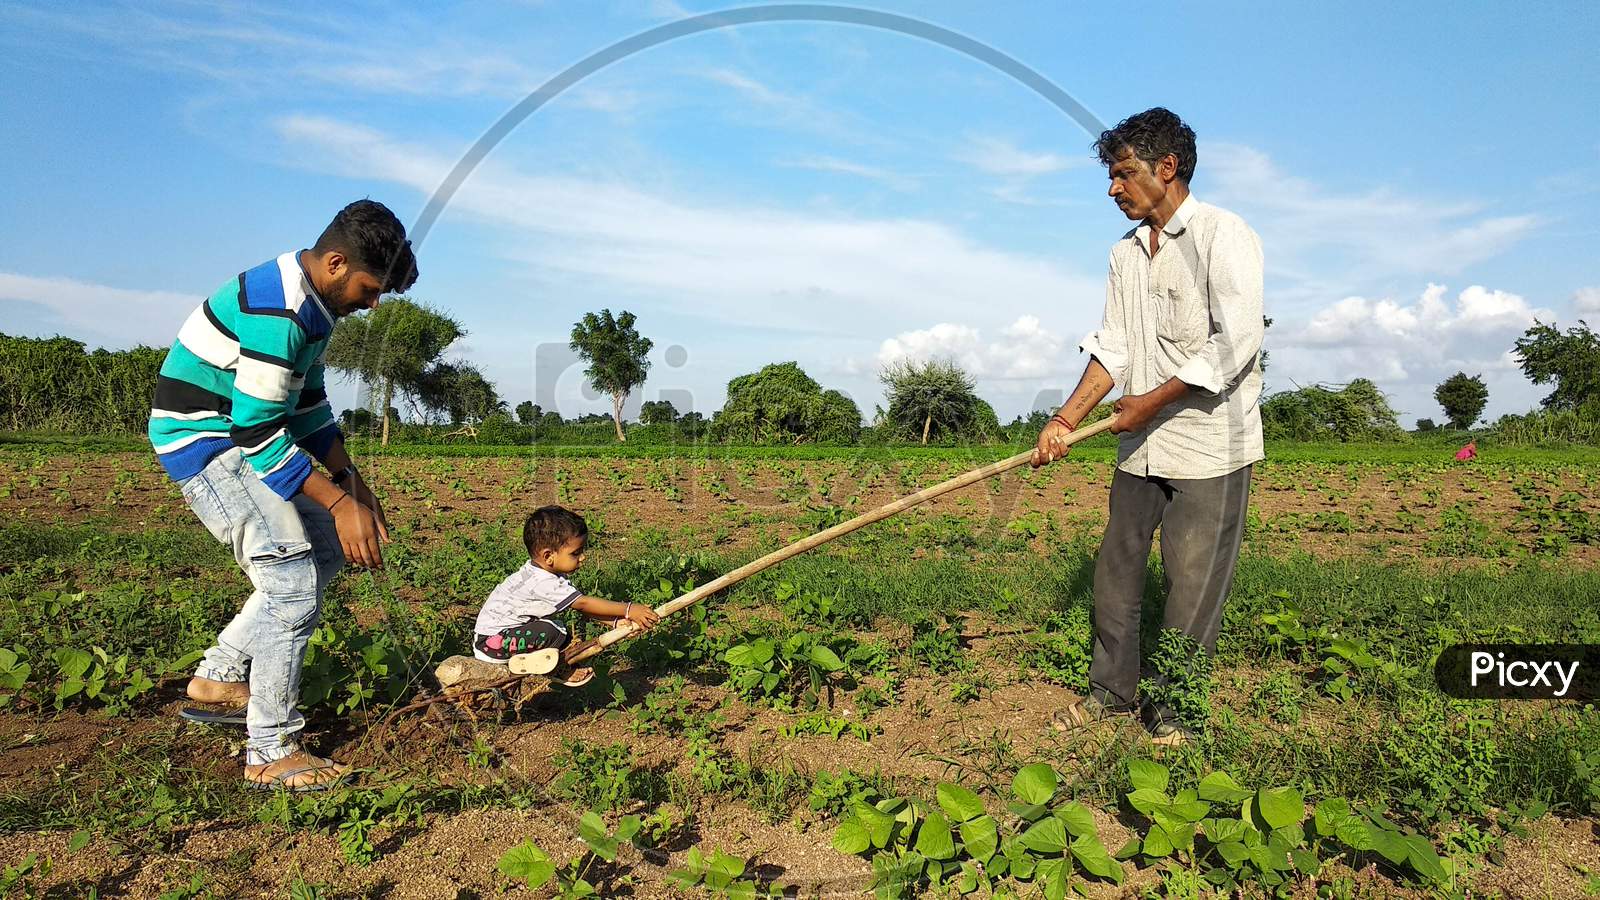 17 july 2020: A young Indian child is having fun on a farm with his grandfather and uncle